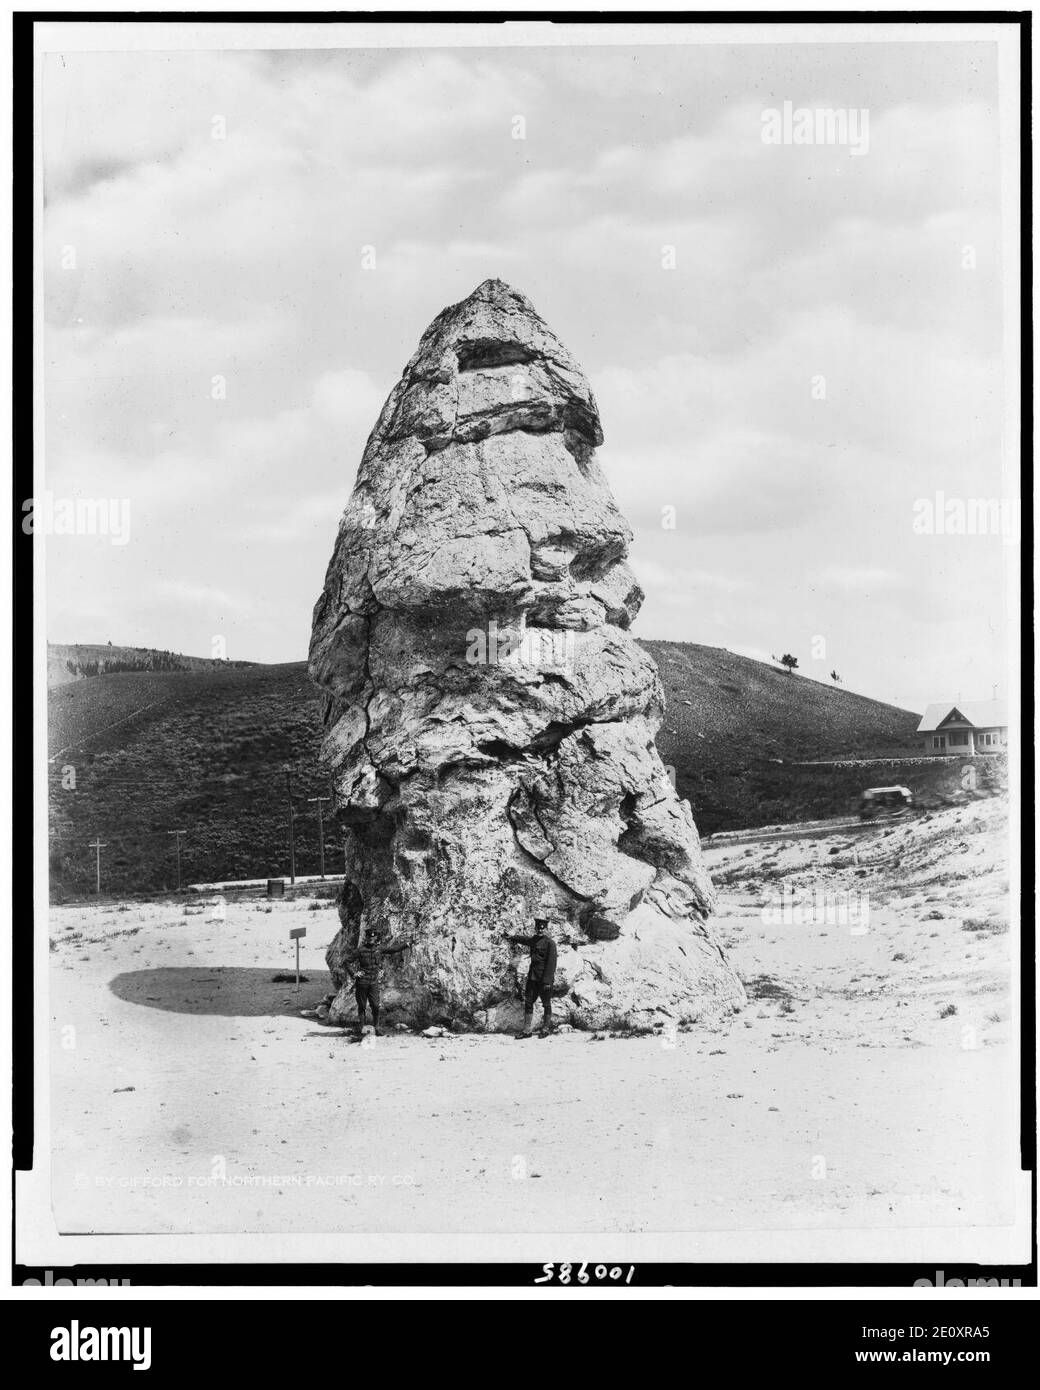 Liberty Cap at Mammoth Hot Springs, Yellowstone National Park, Wyoming, reached by the Northern Pacific Railway via Gardiner Gateway Stock Photo